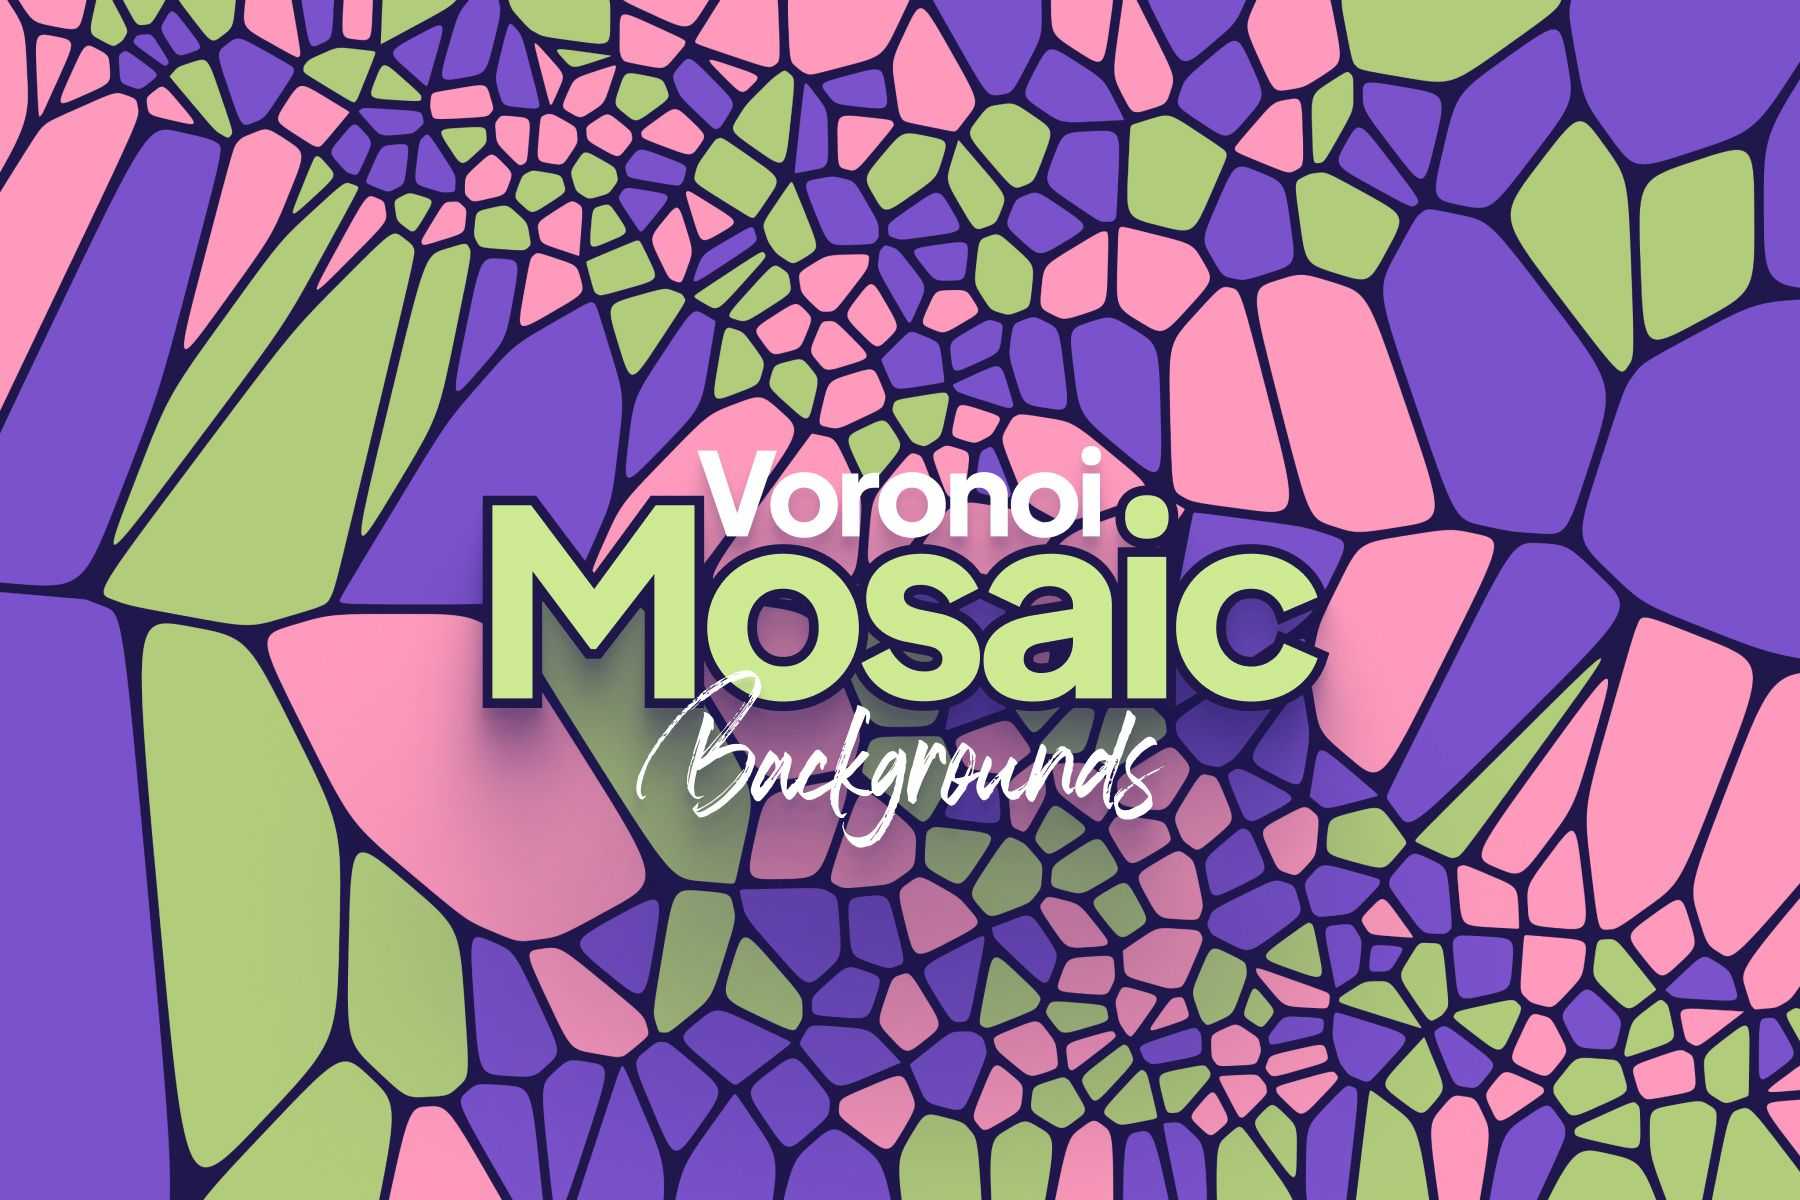 A collection of 12 Mathematical Voronoi Diagram Backgrounds, showing last 4 product images